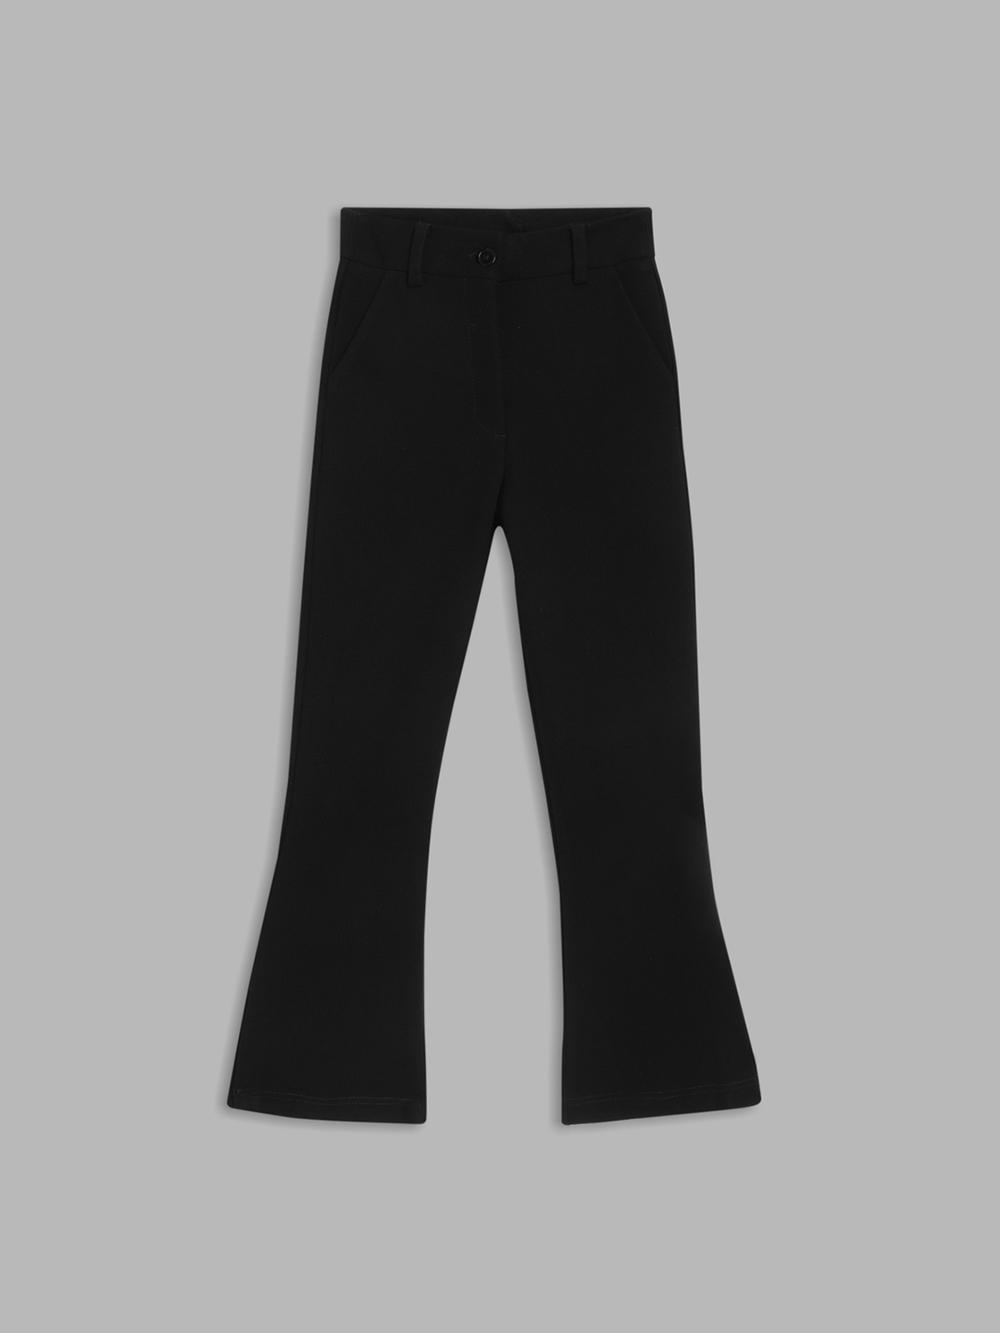 black solid fit and flare trouser